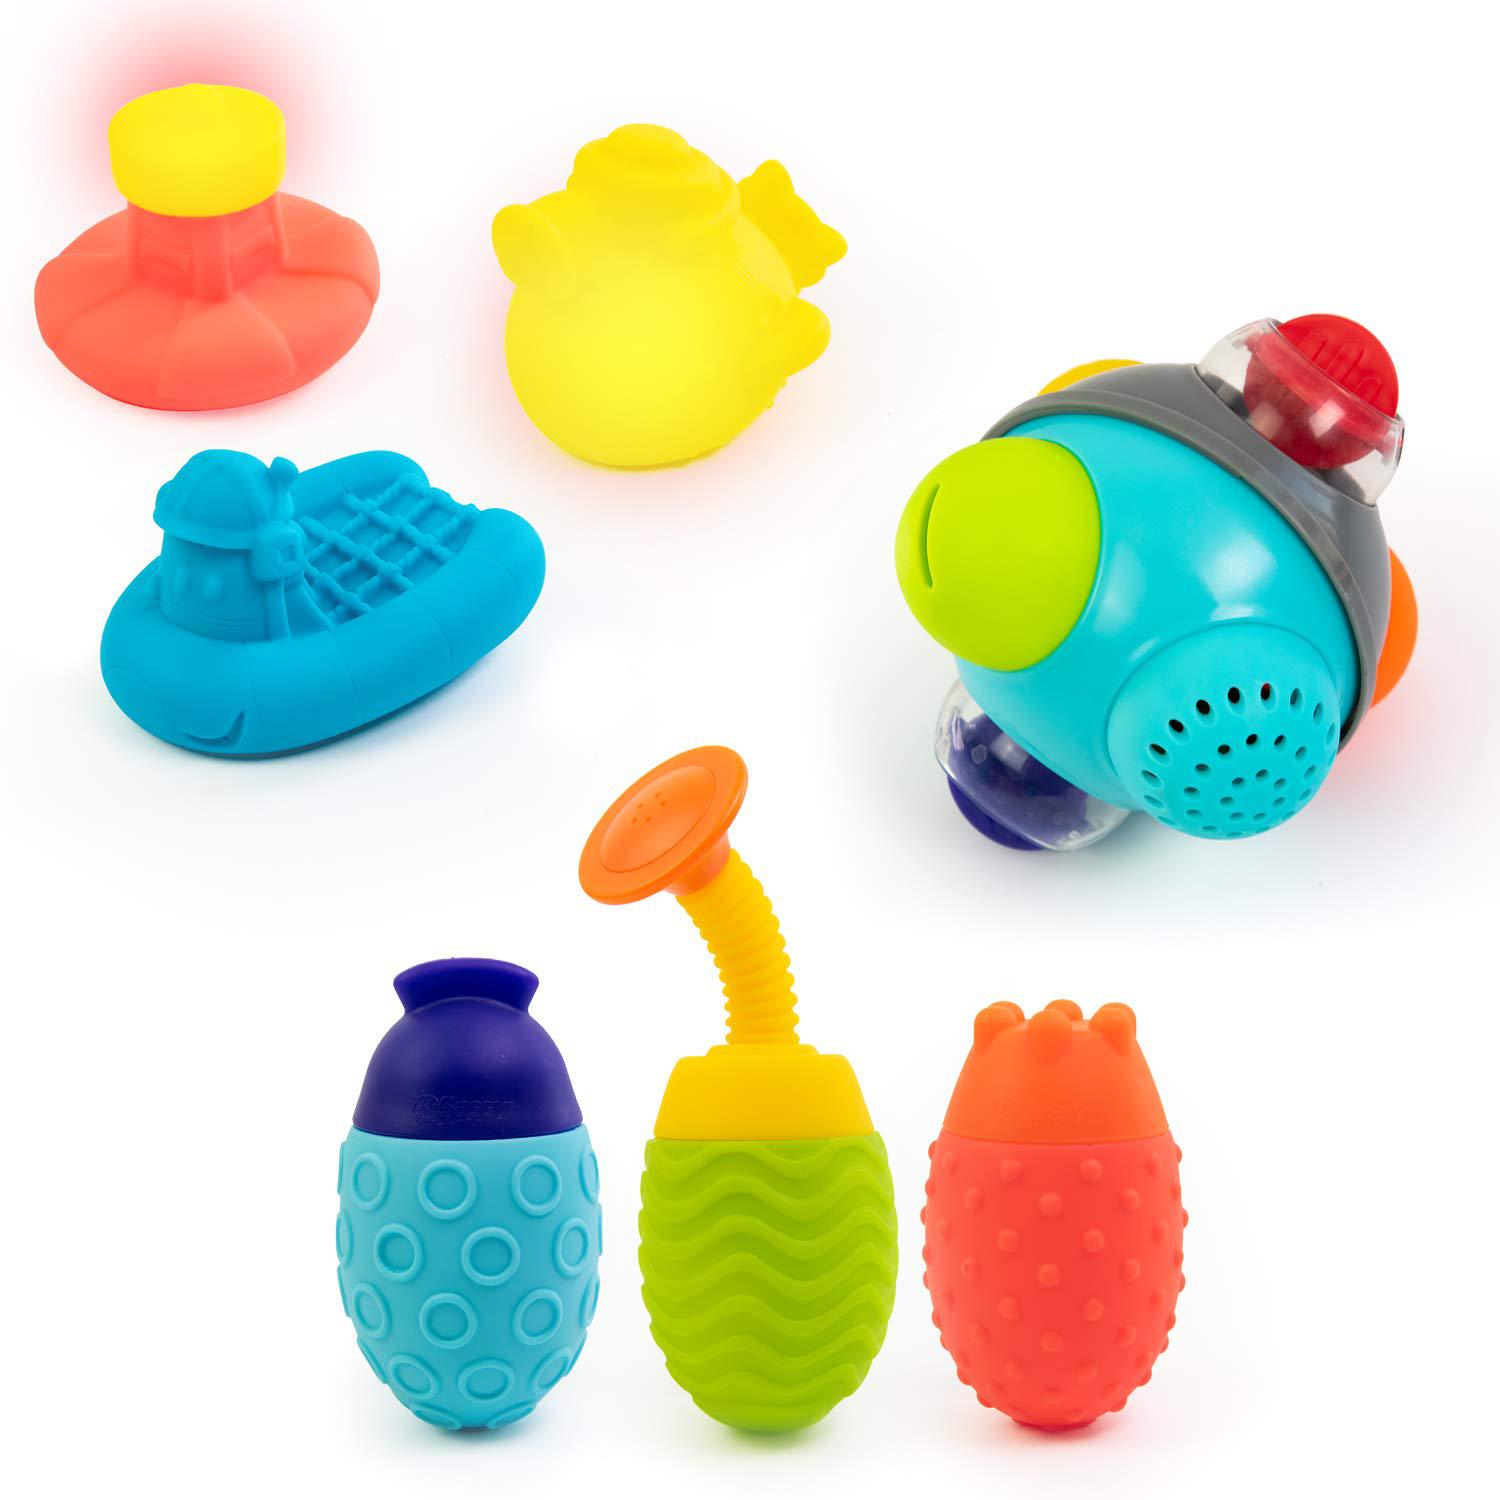 sassy light up buoy, boats, shower ball & ez squeezies bath toys 7piece set - ages 6+ months